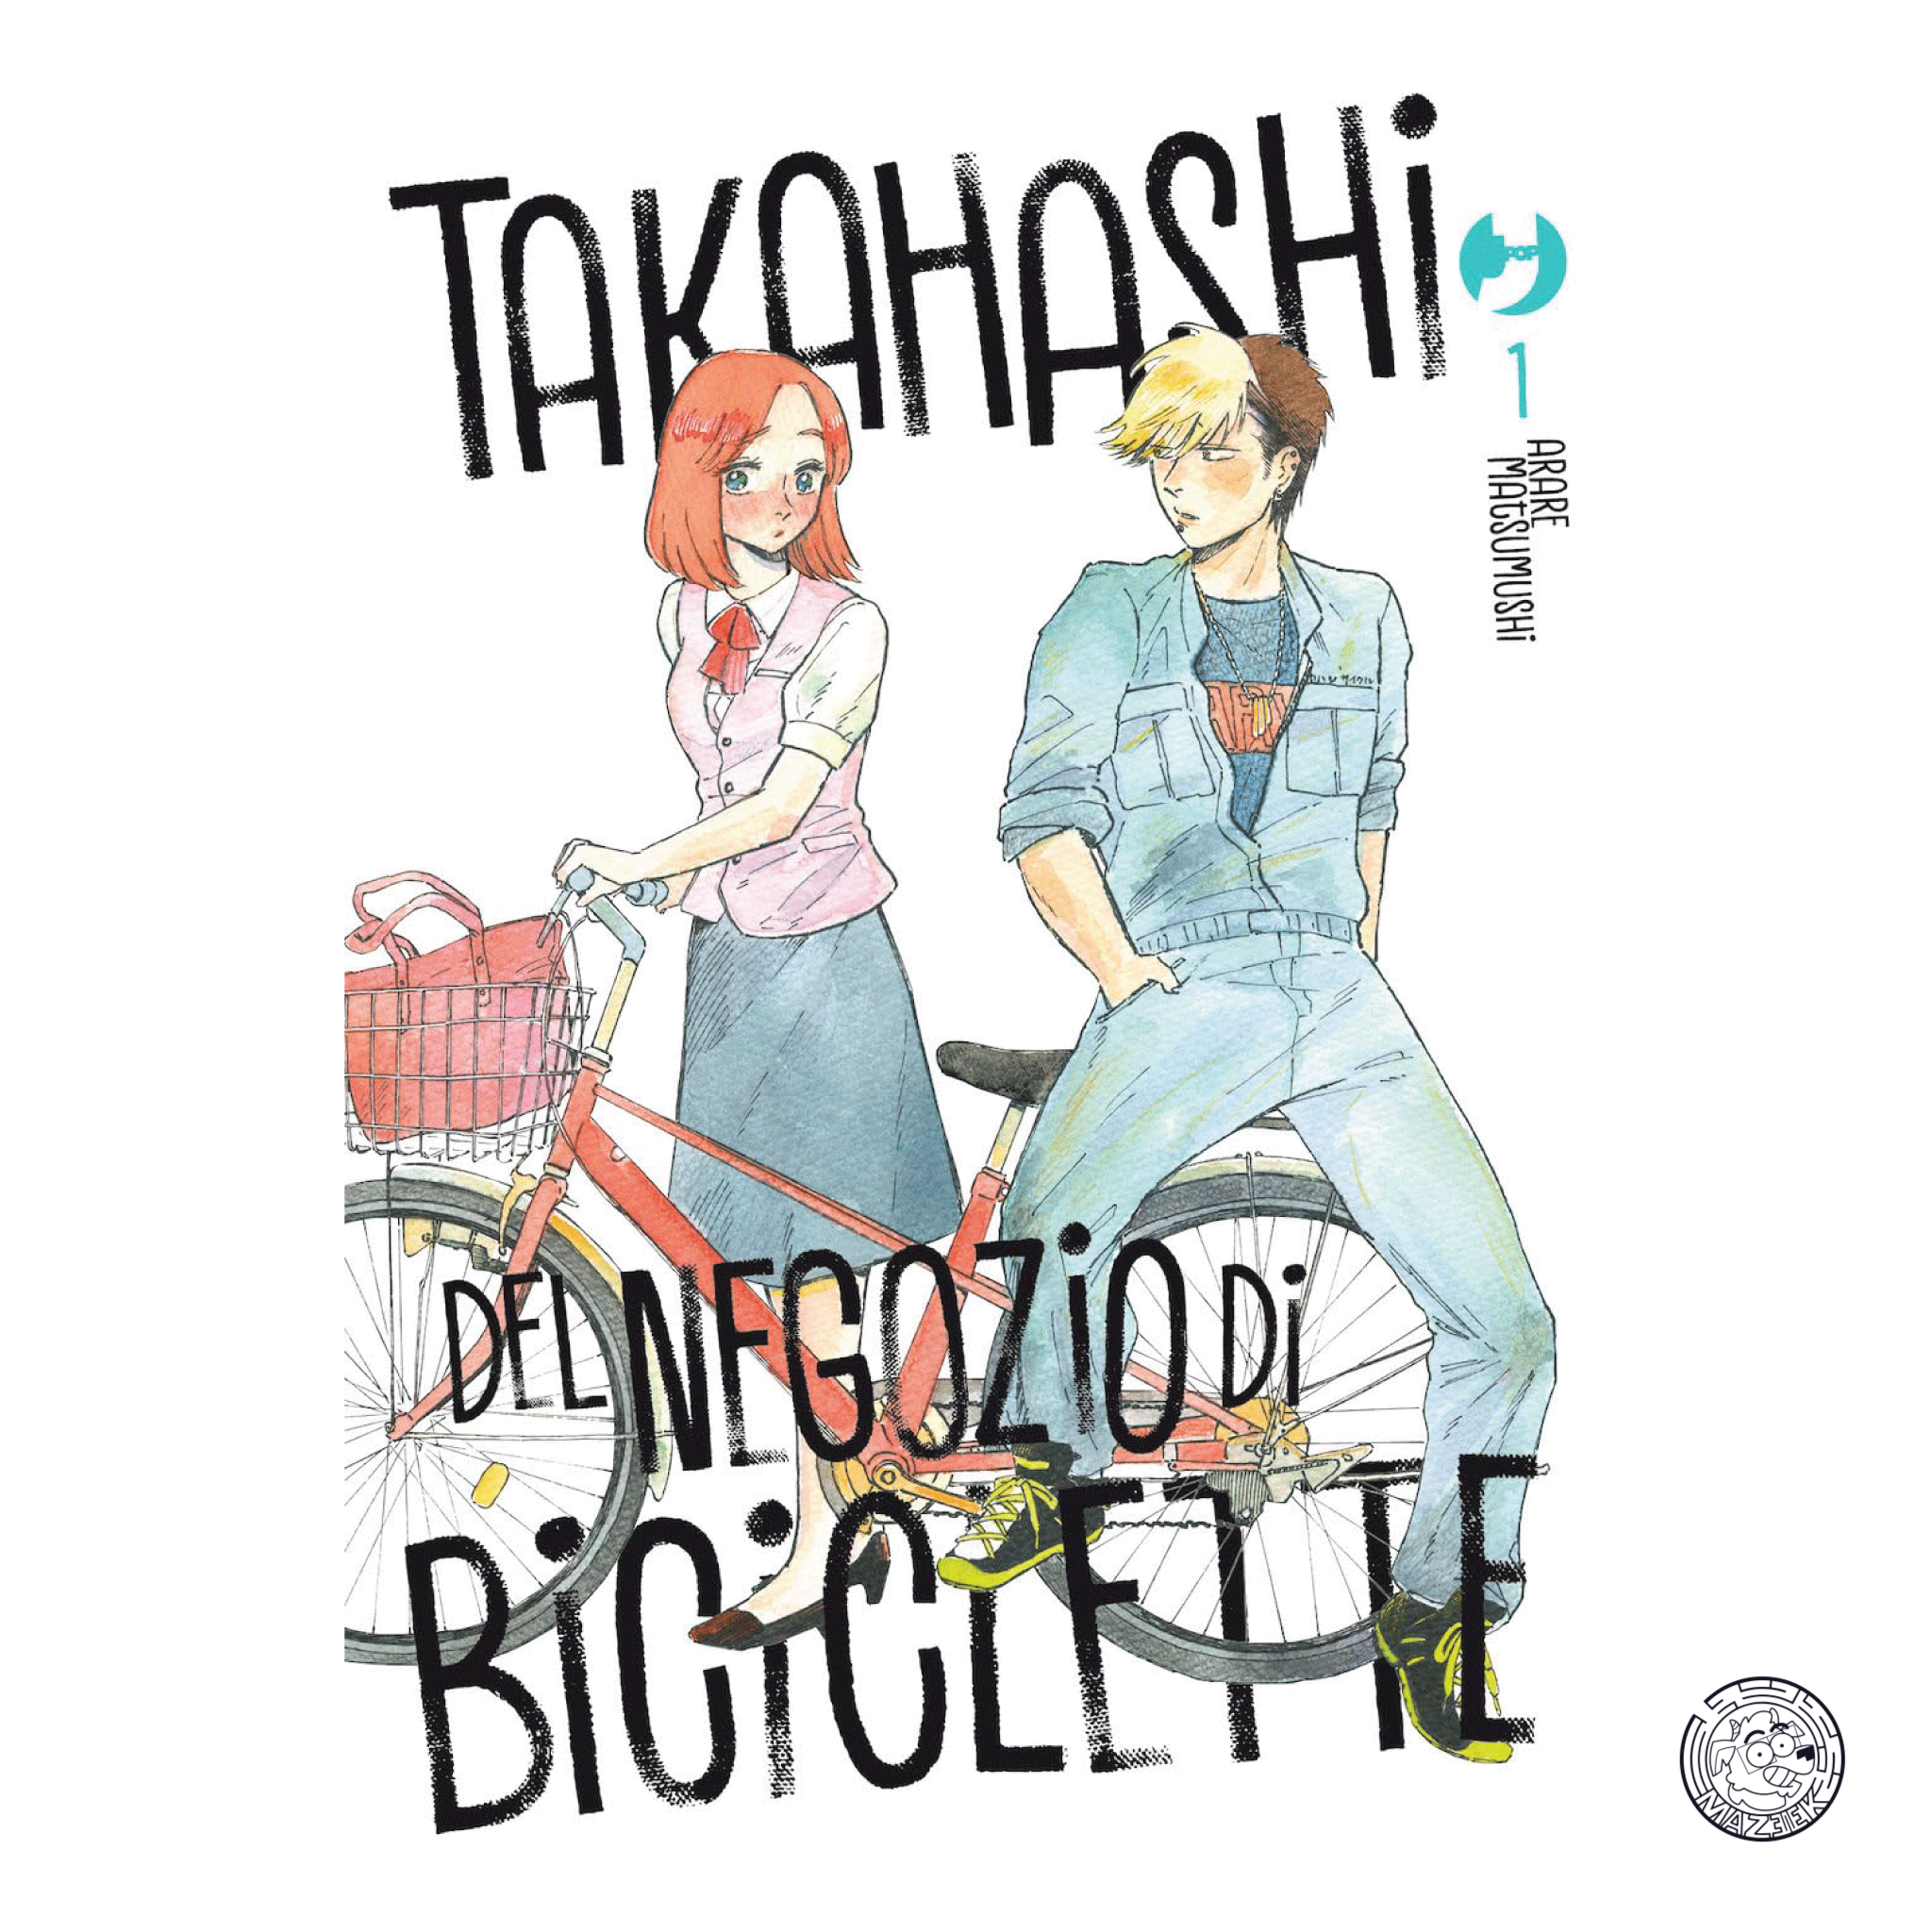 Takahashi from Bicycle Shop 01